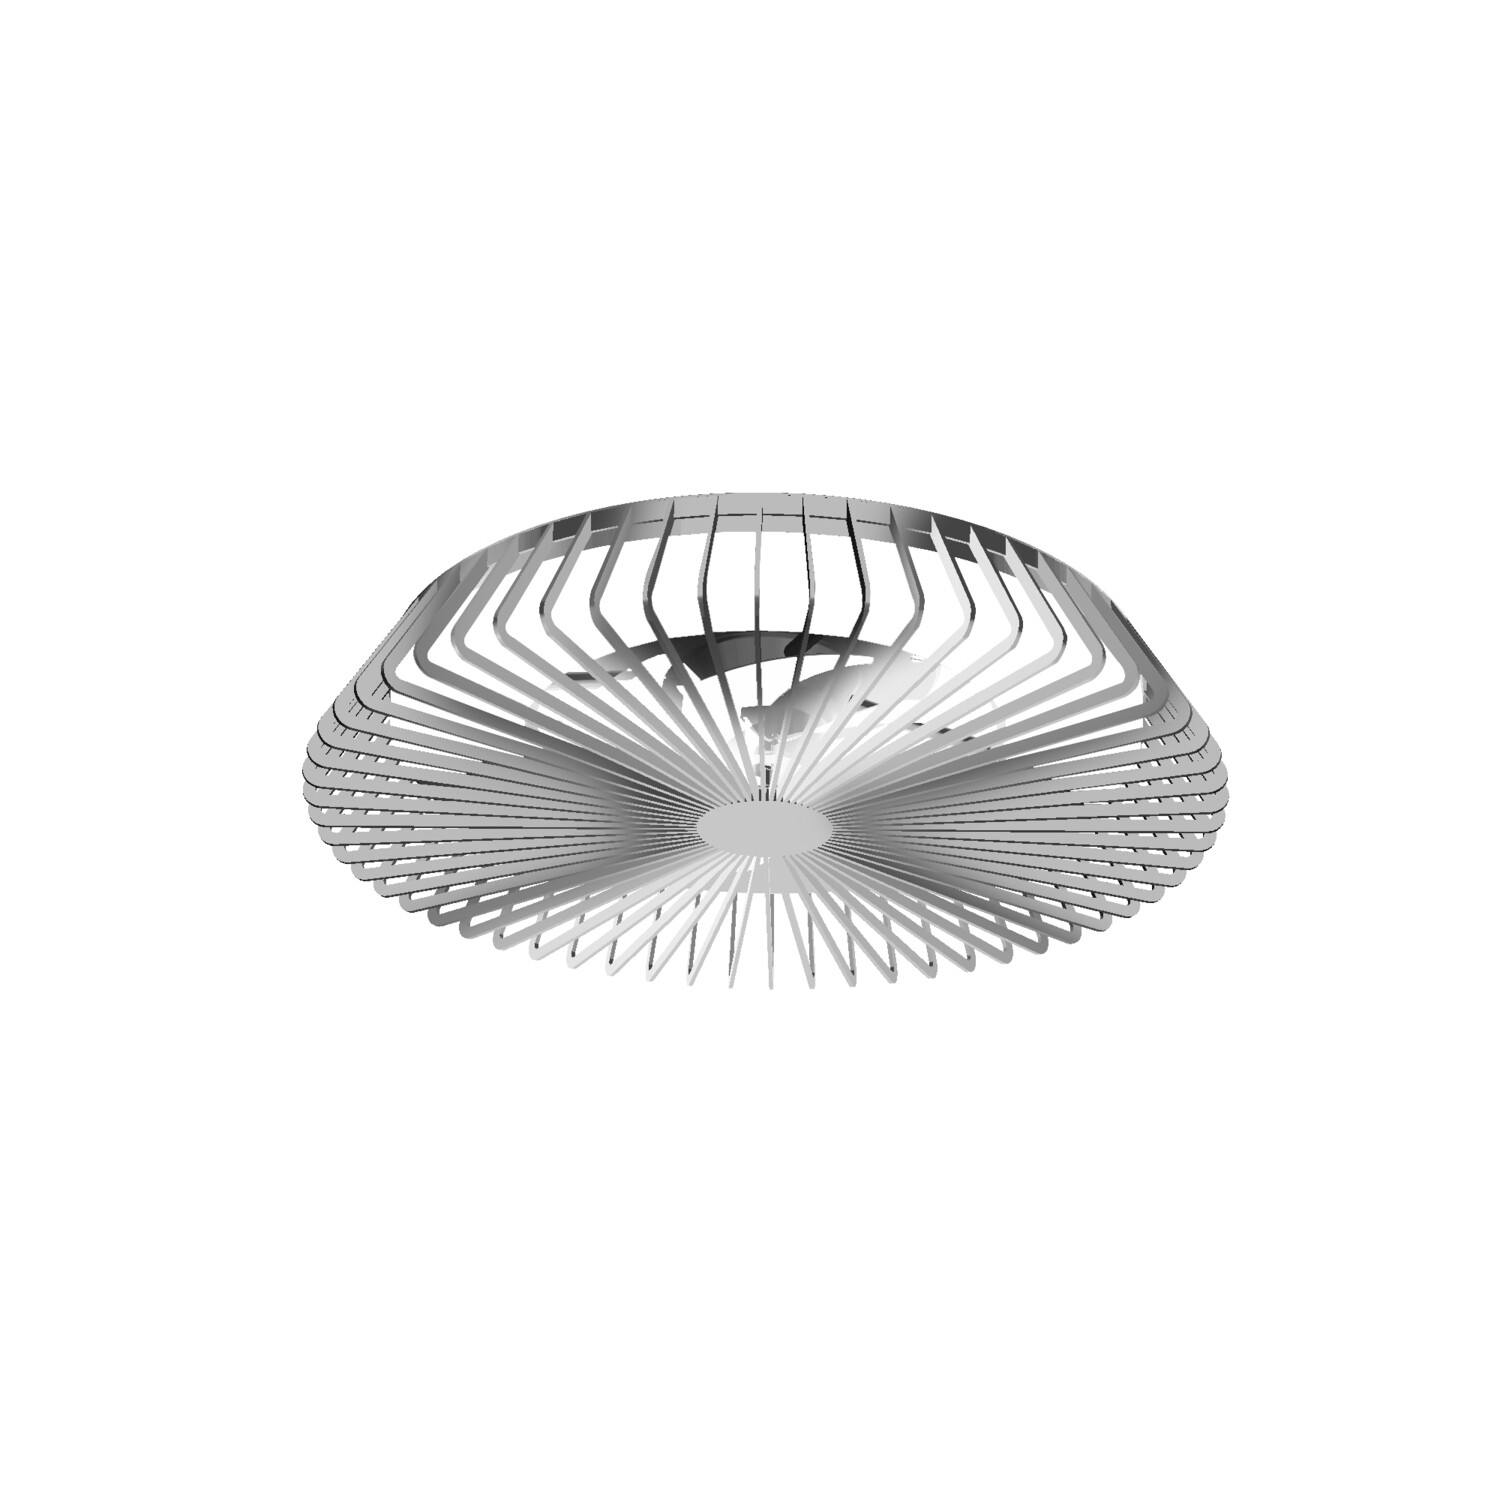 Himalaya 70W LED Dimmable Ceiling Light With Built-In 35W DC Fan, c/w Remote Control, APP & Alexa/Google Voice Control, 4900lm, Silver